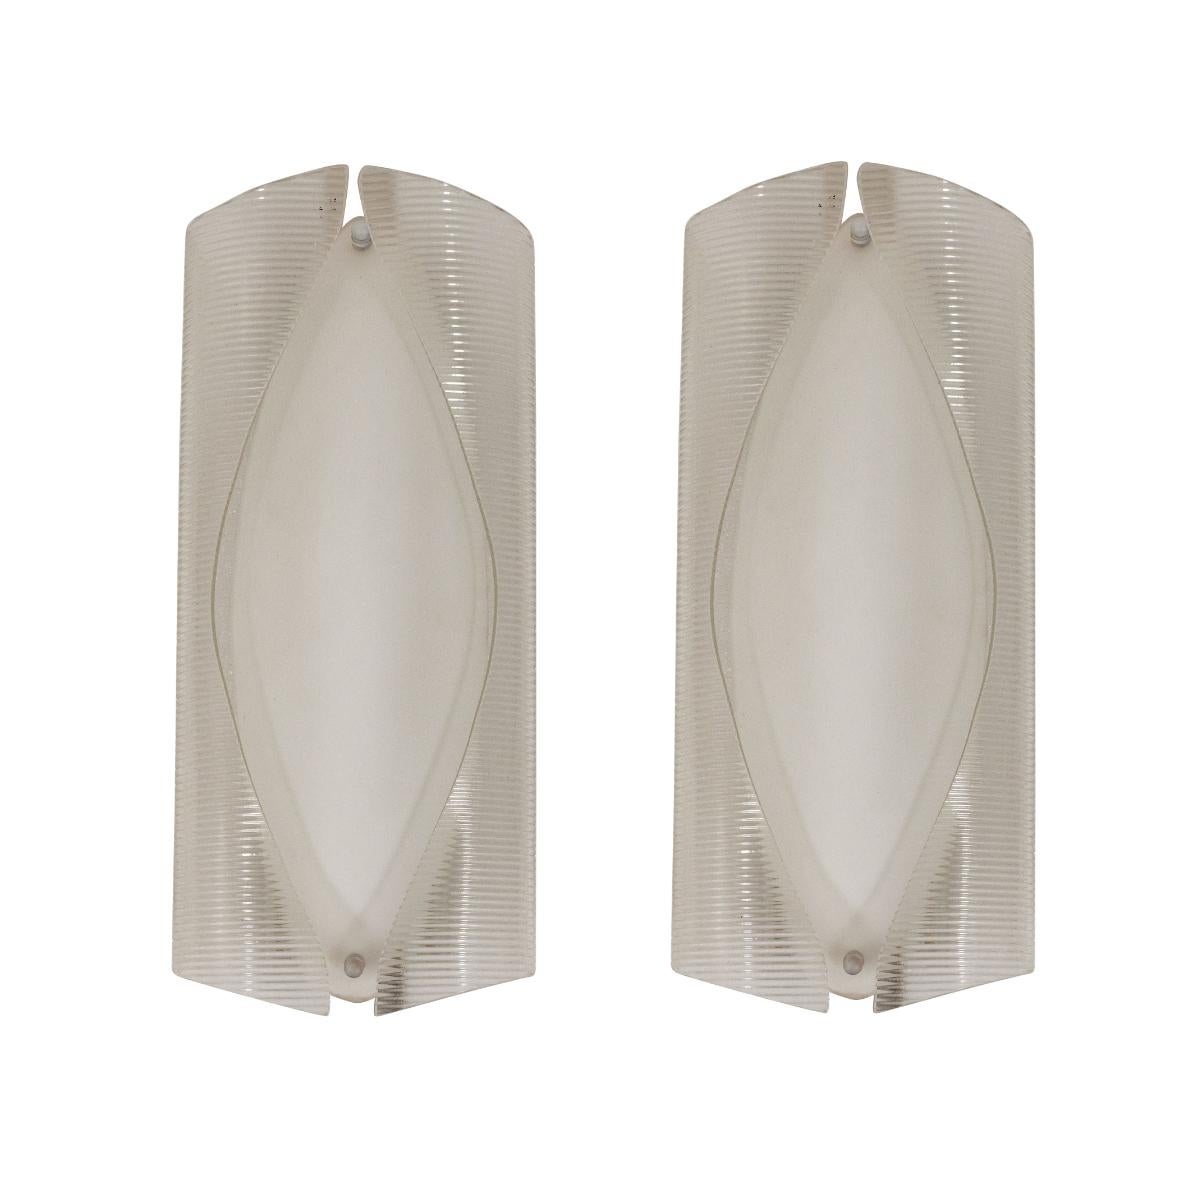 Pair of organic sculptural glass sconces with layered clear and white glass shades.